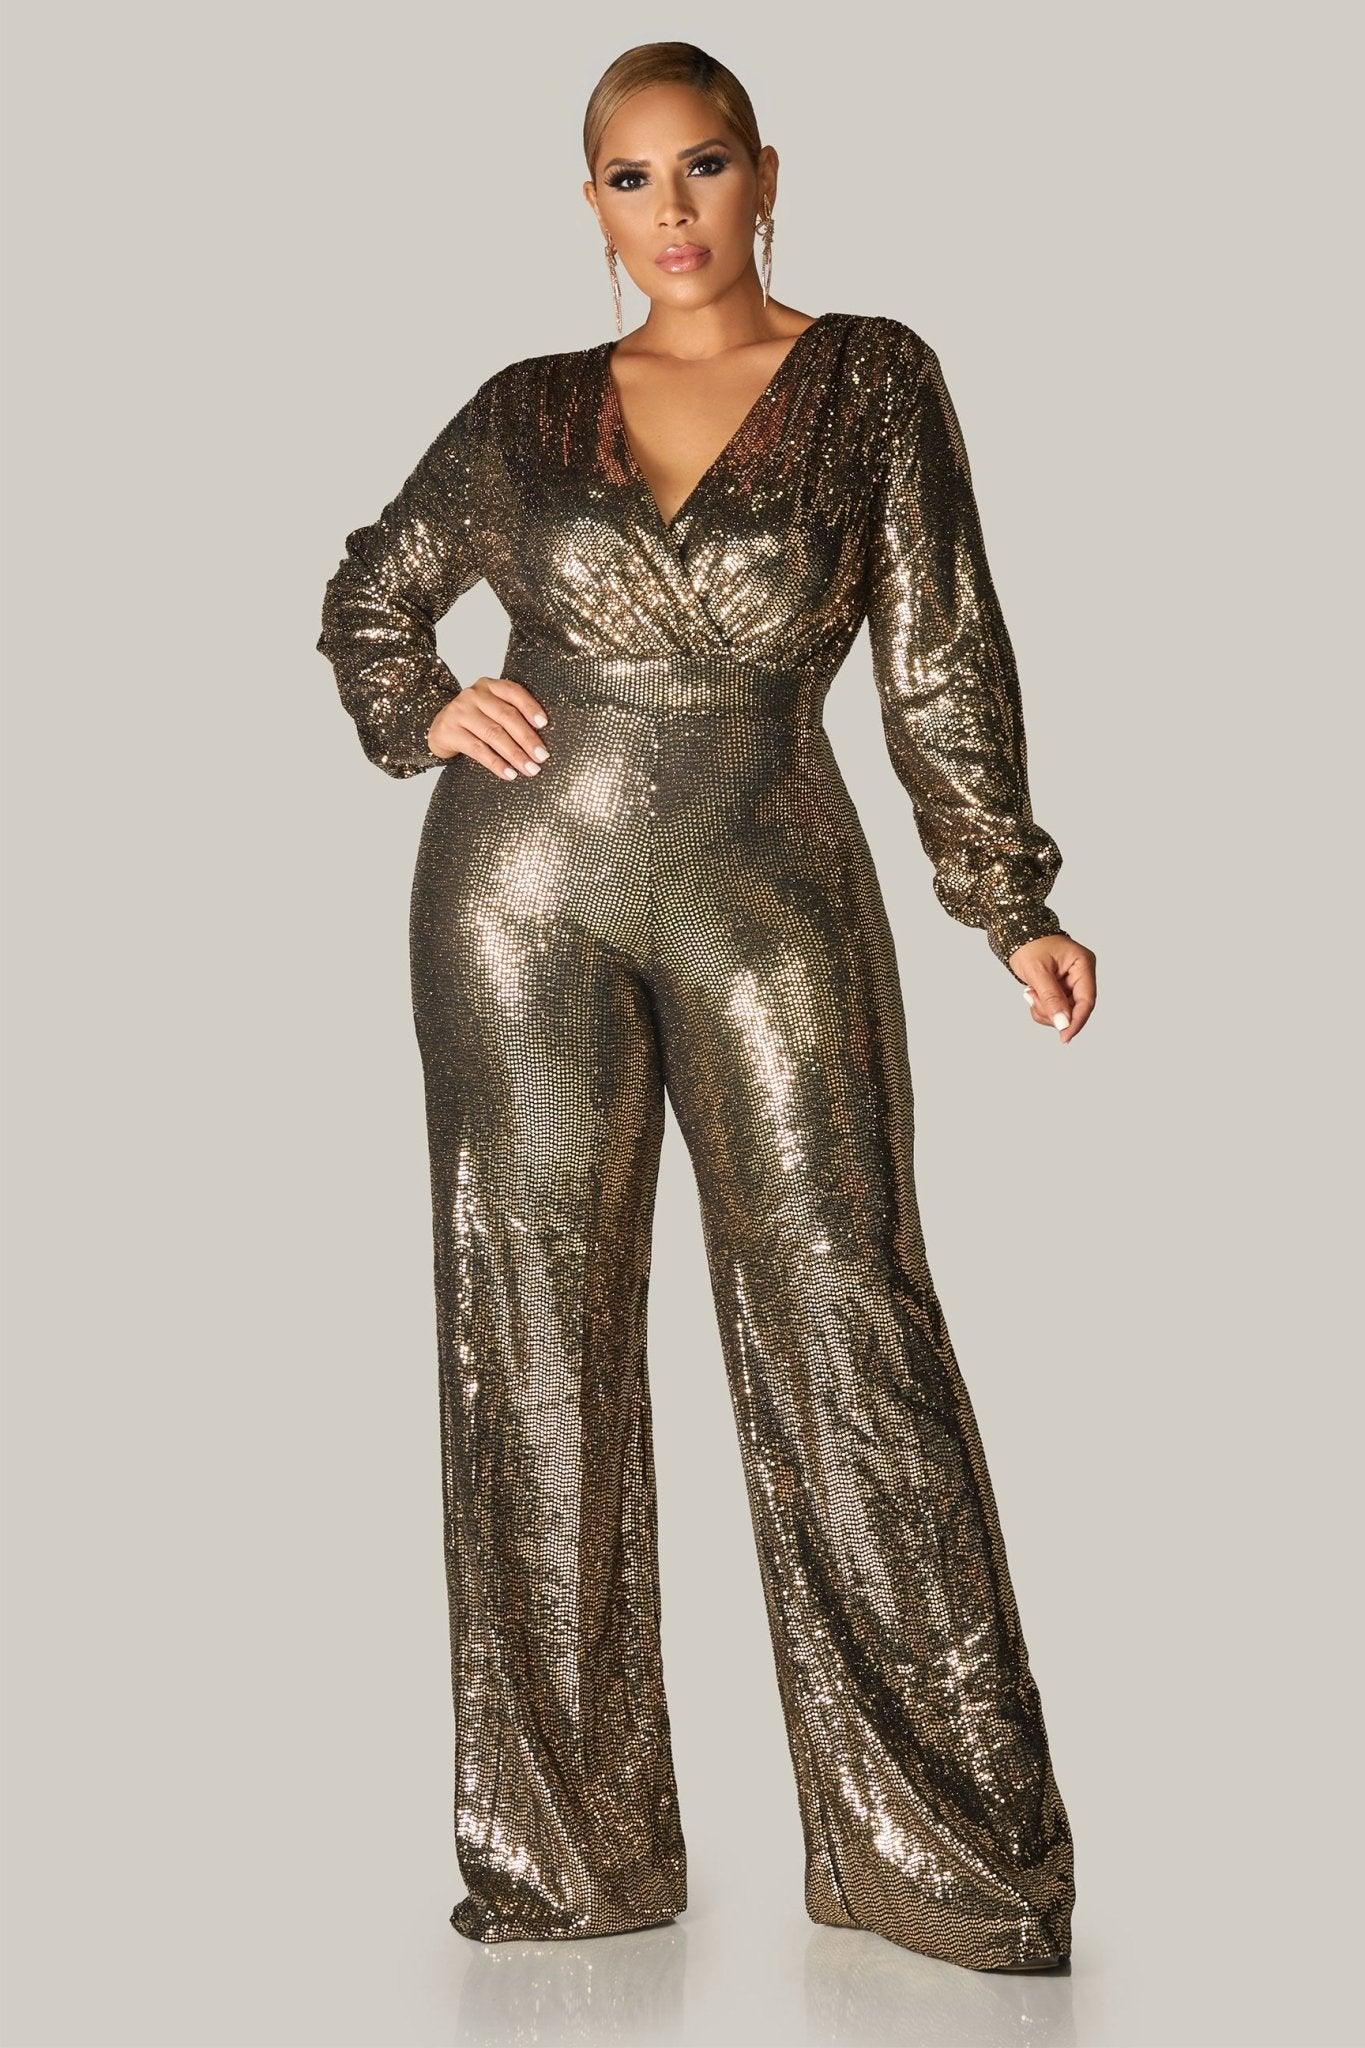 Shine Bright Queen Jumpsuit - MY SEXY STYLES